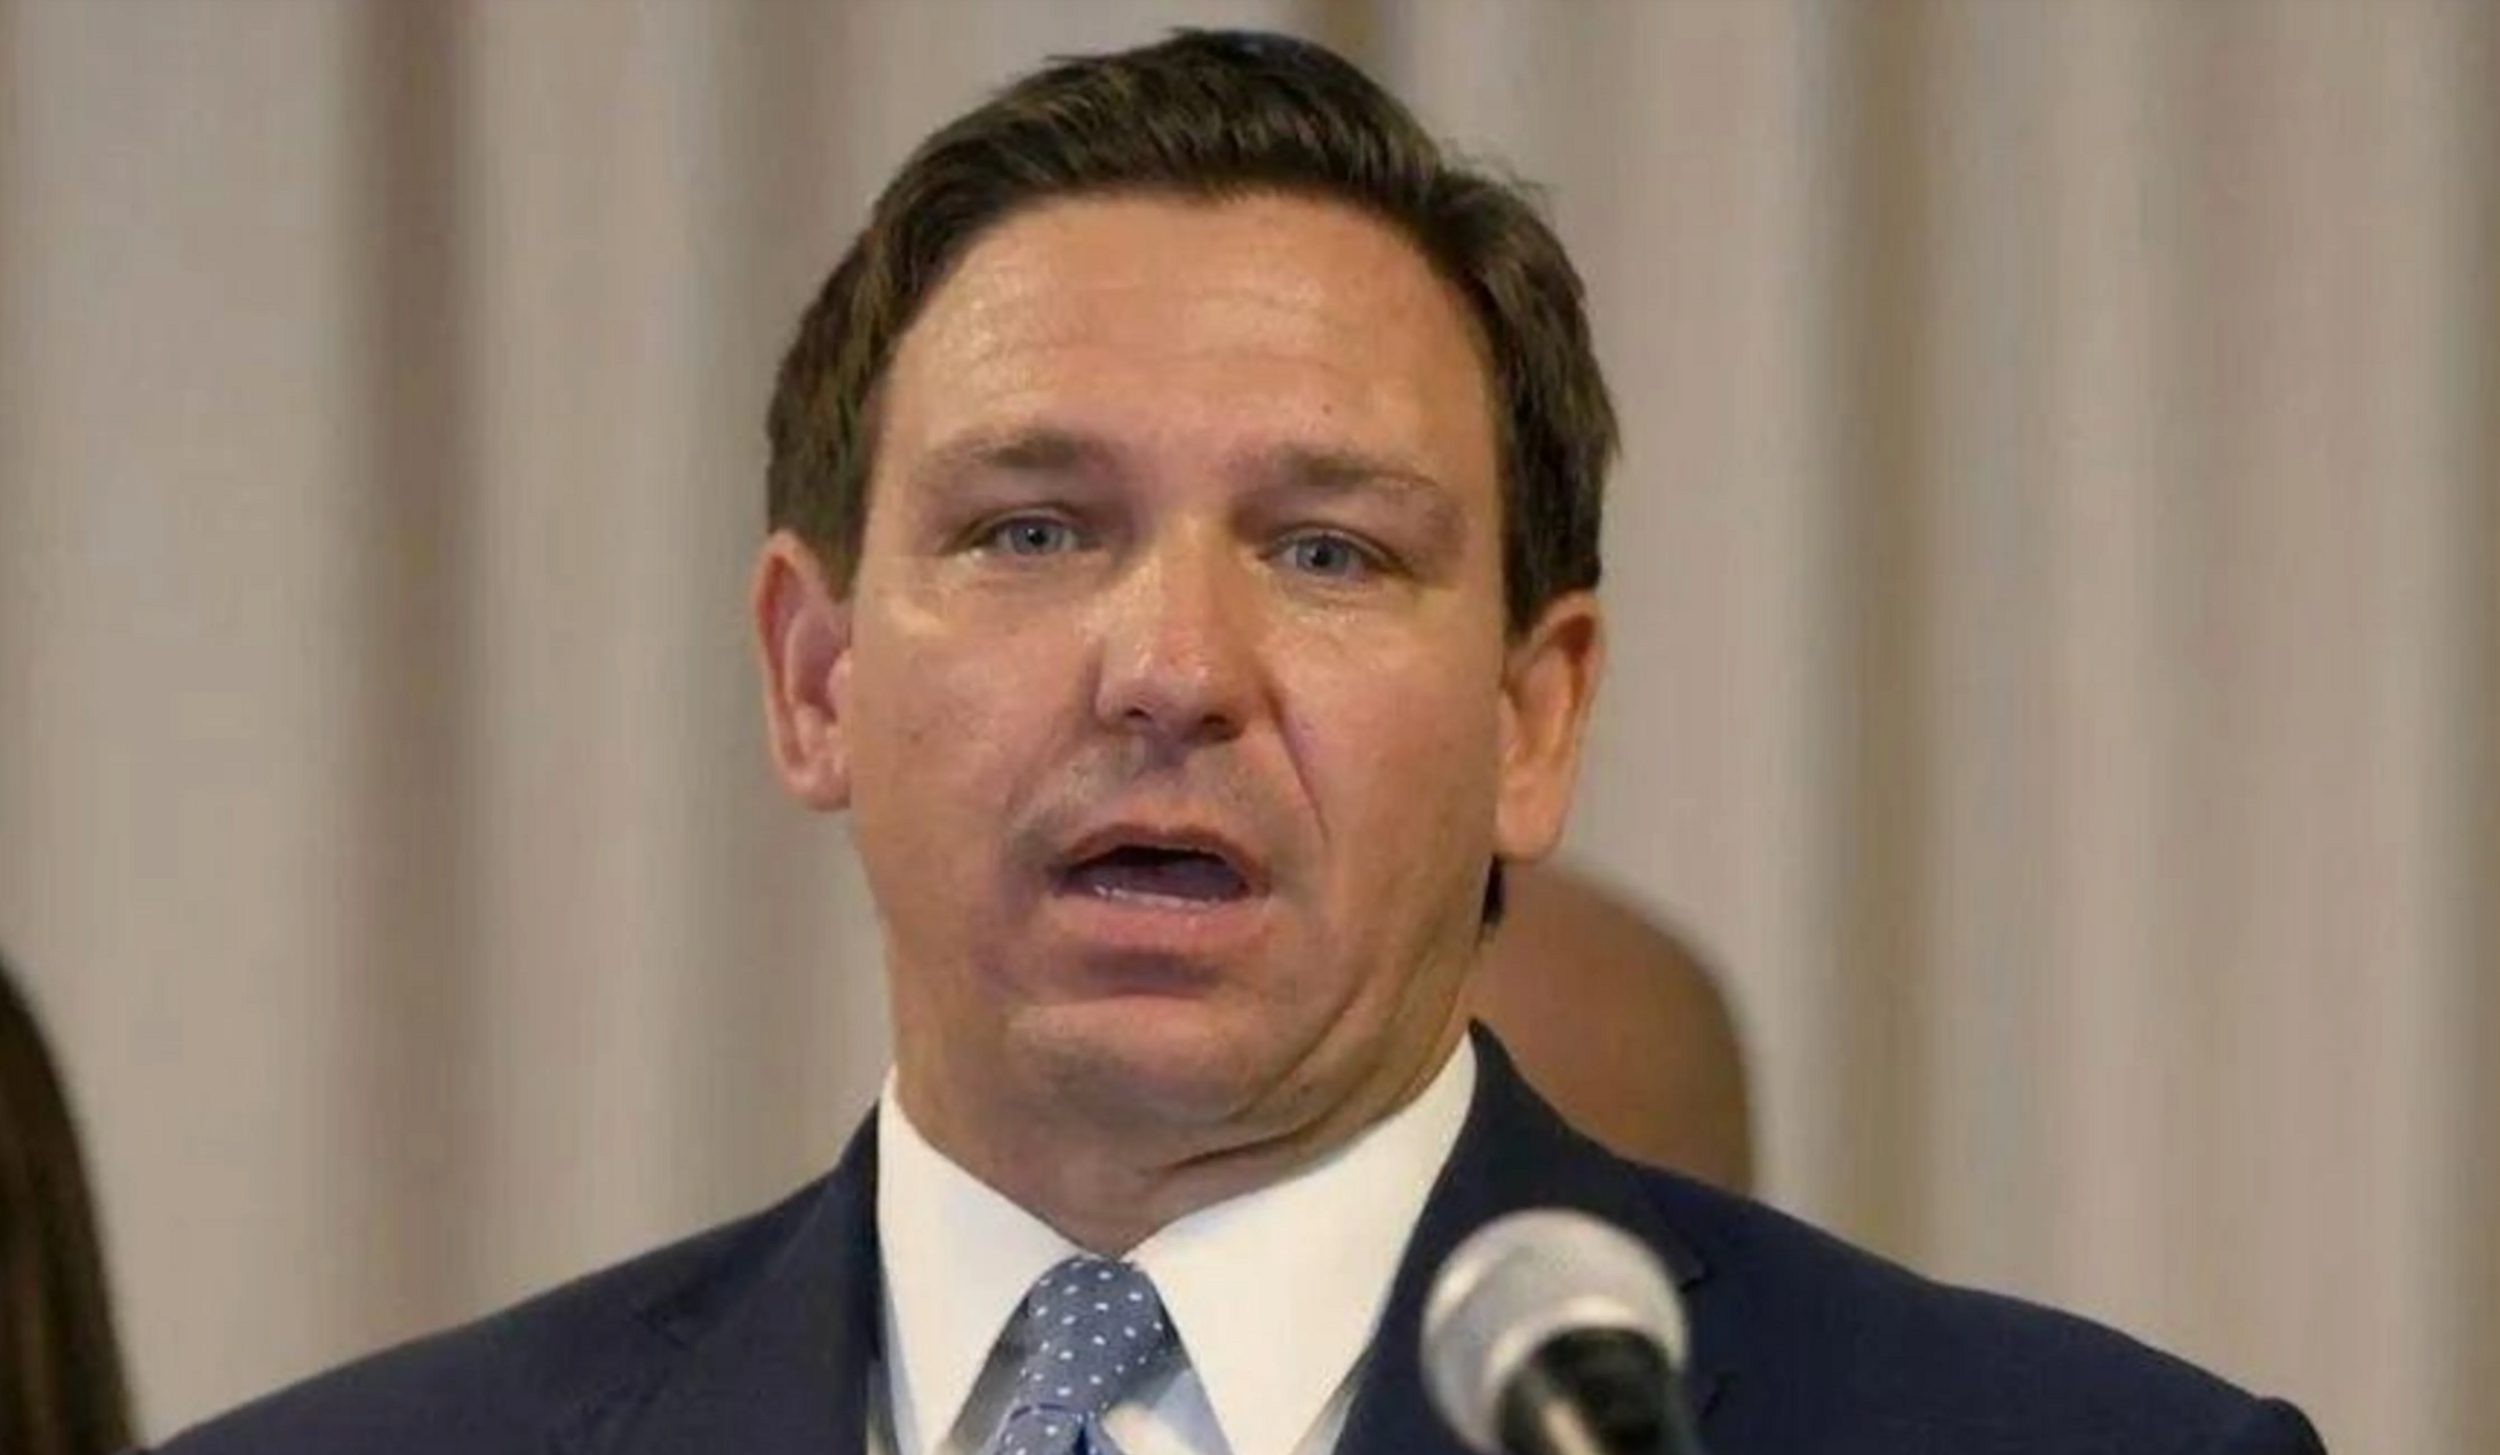 Florida Cited 'Critical Race Theory' to Ban Math Text Books but DeSantis Can't Name One Example